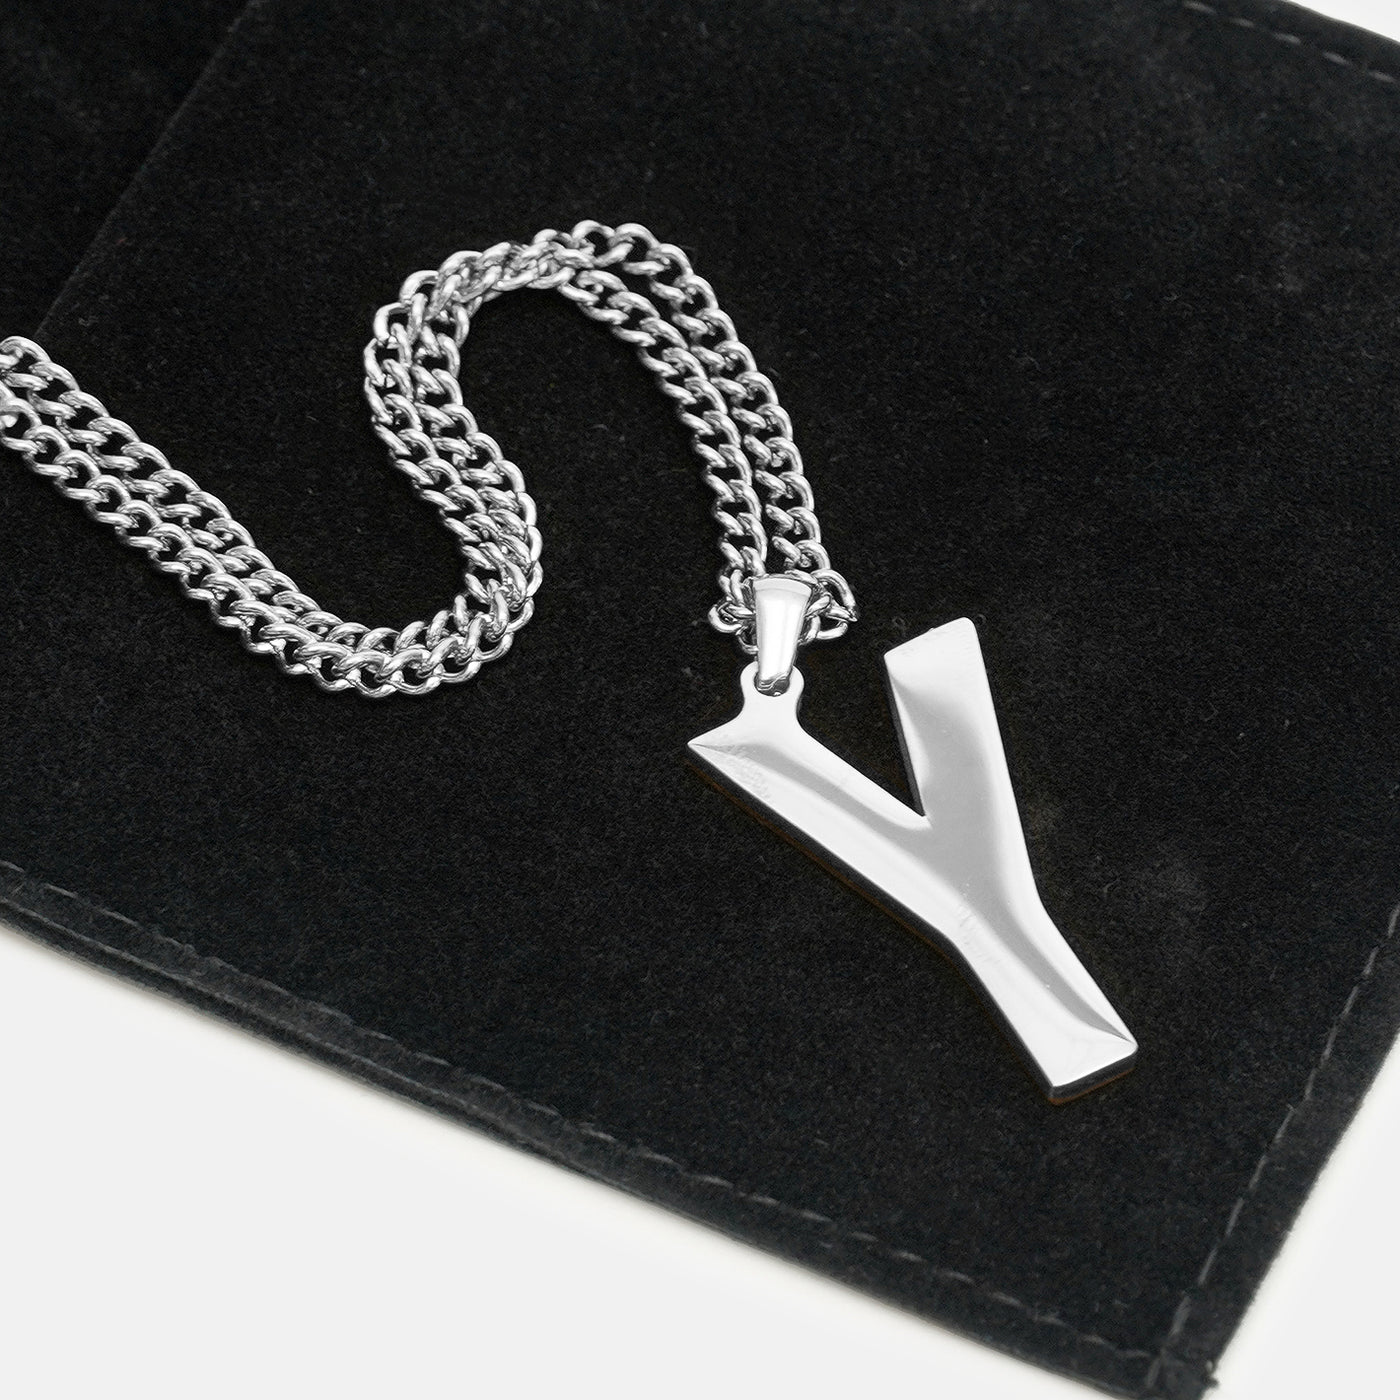 Y Letter Pendant with Chain Necklace - Stainless Steel